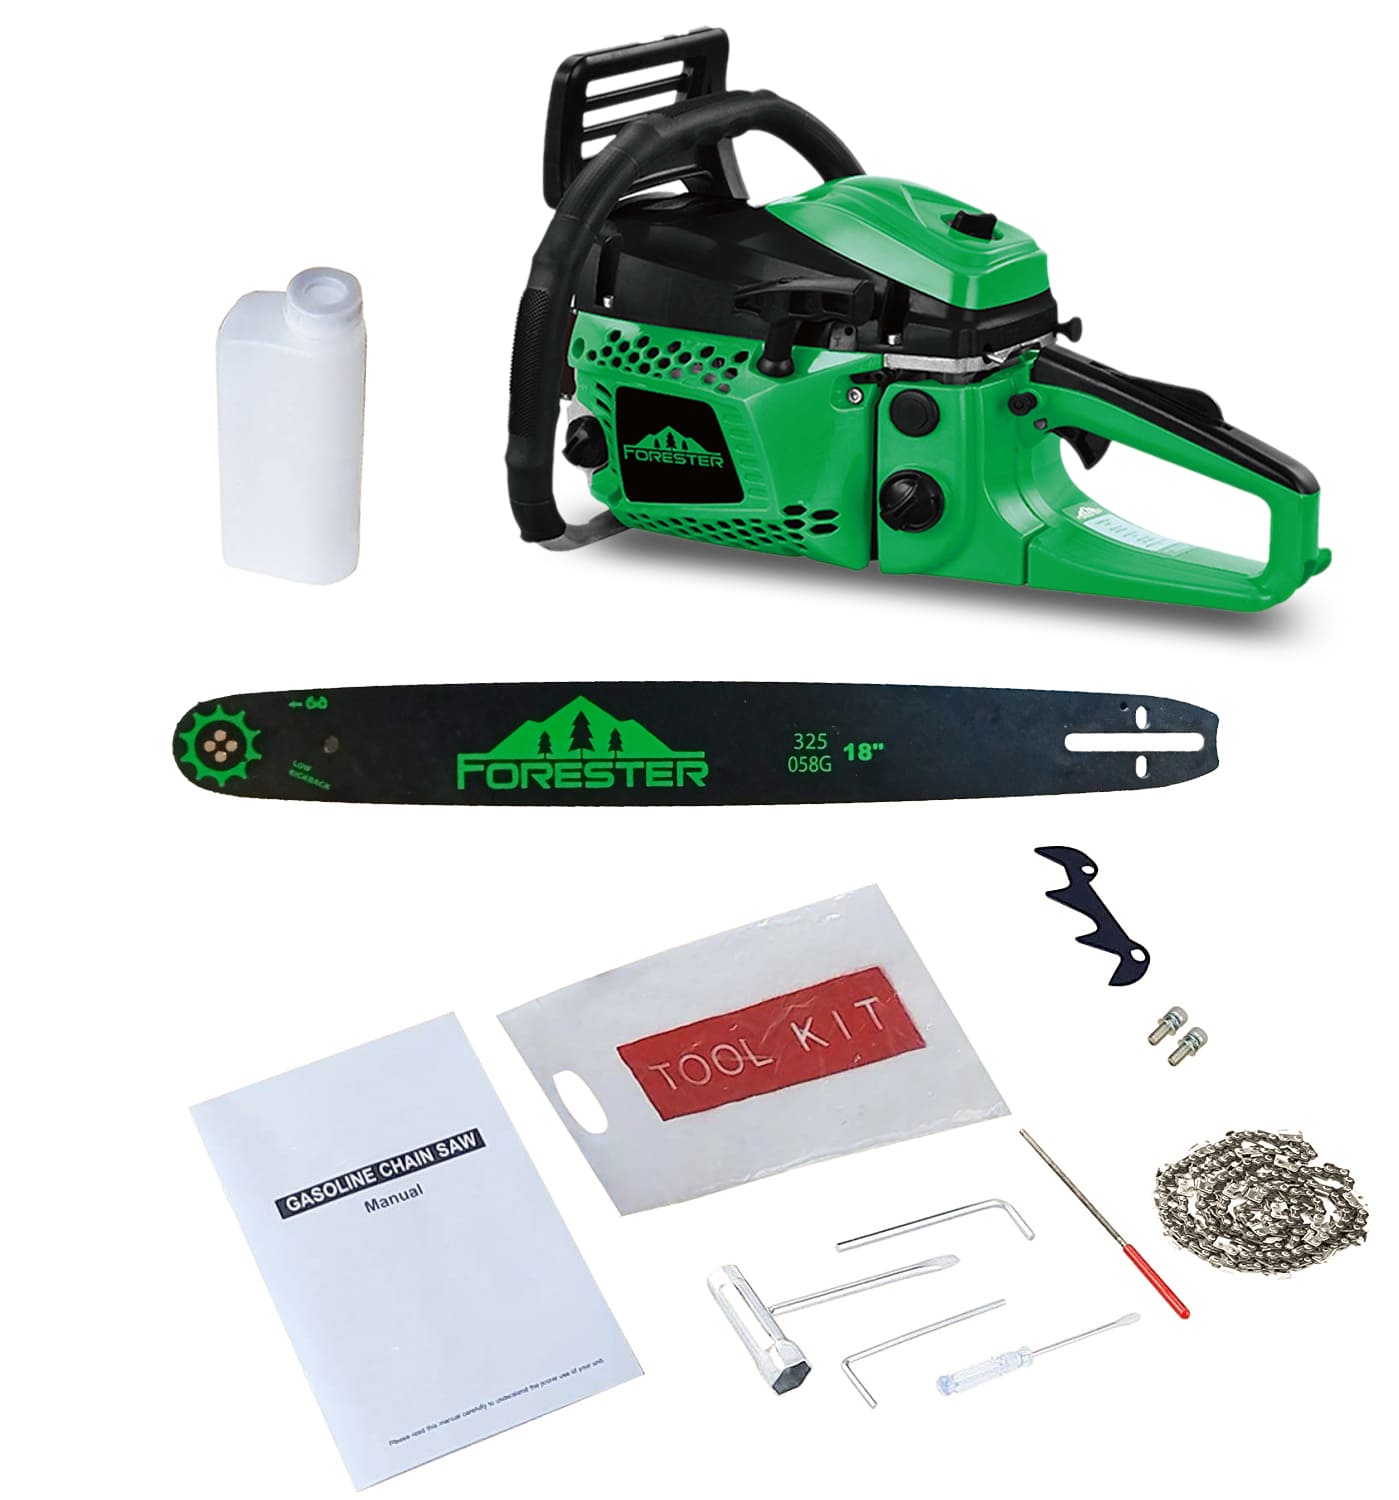 Forester Chainsaw Eco 58cc| 18 Inches